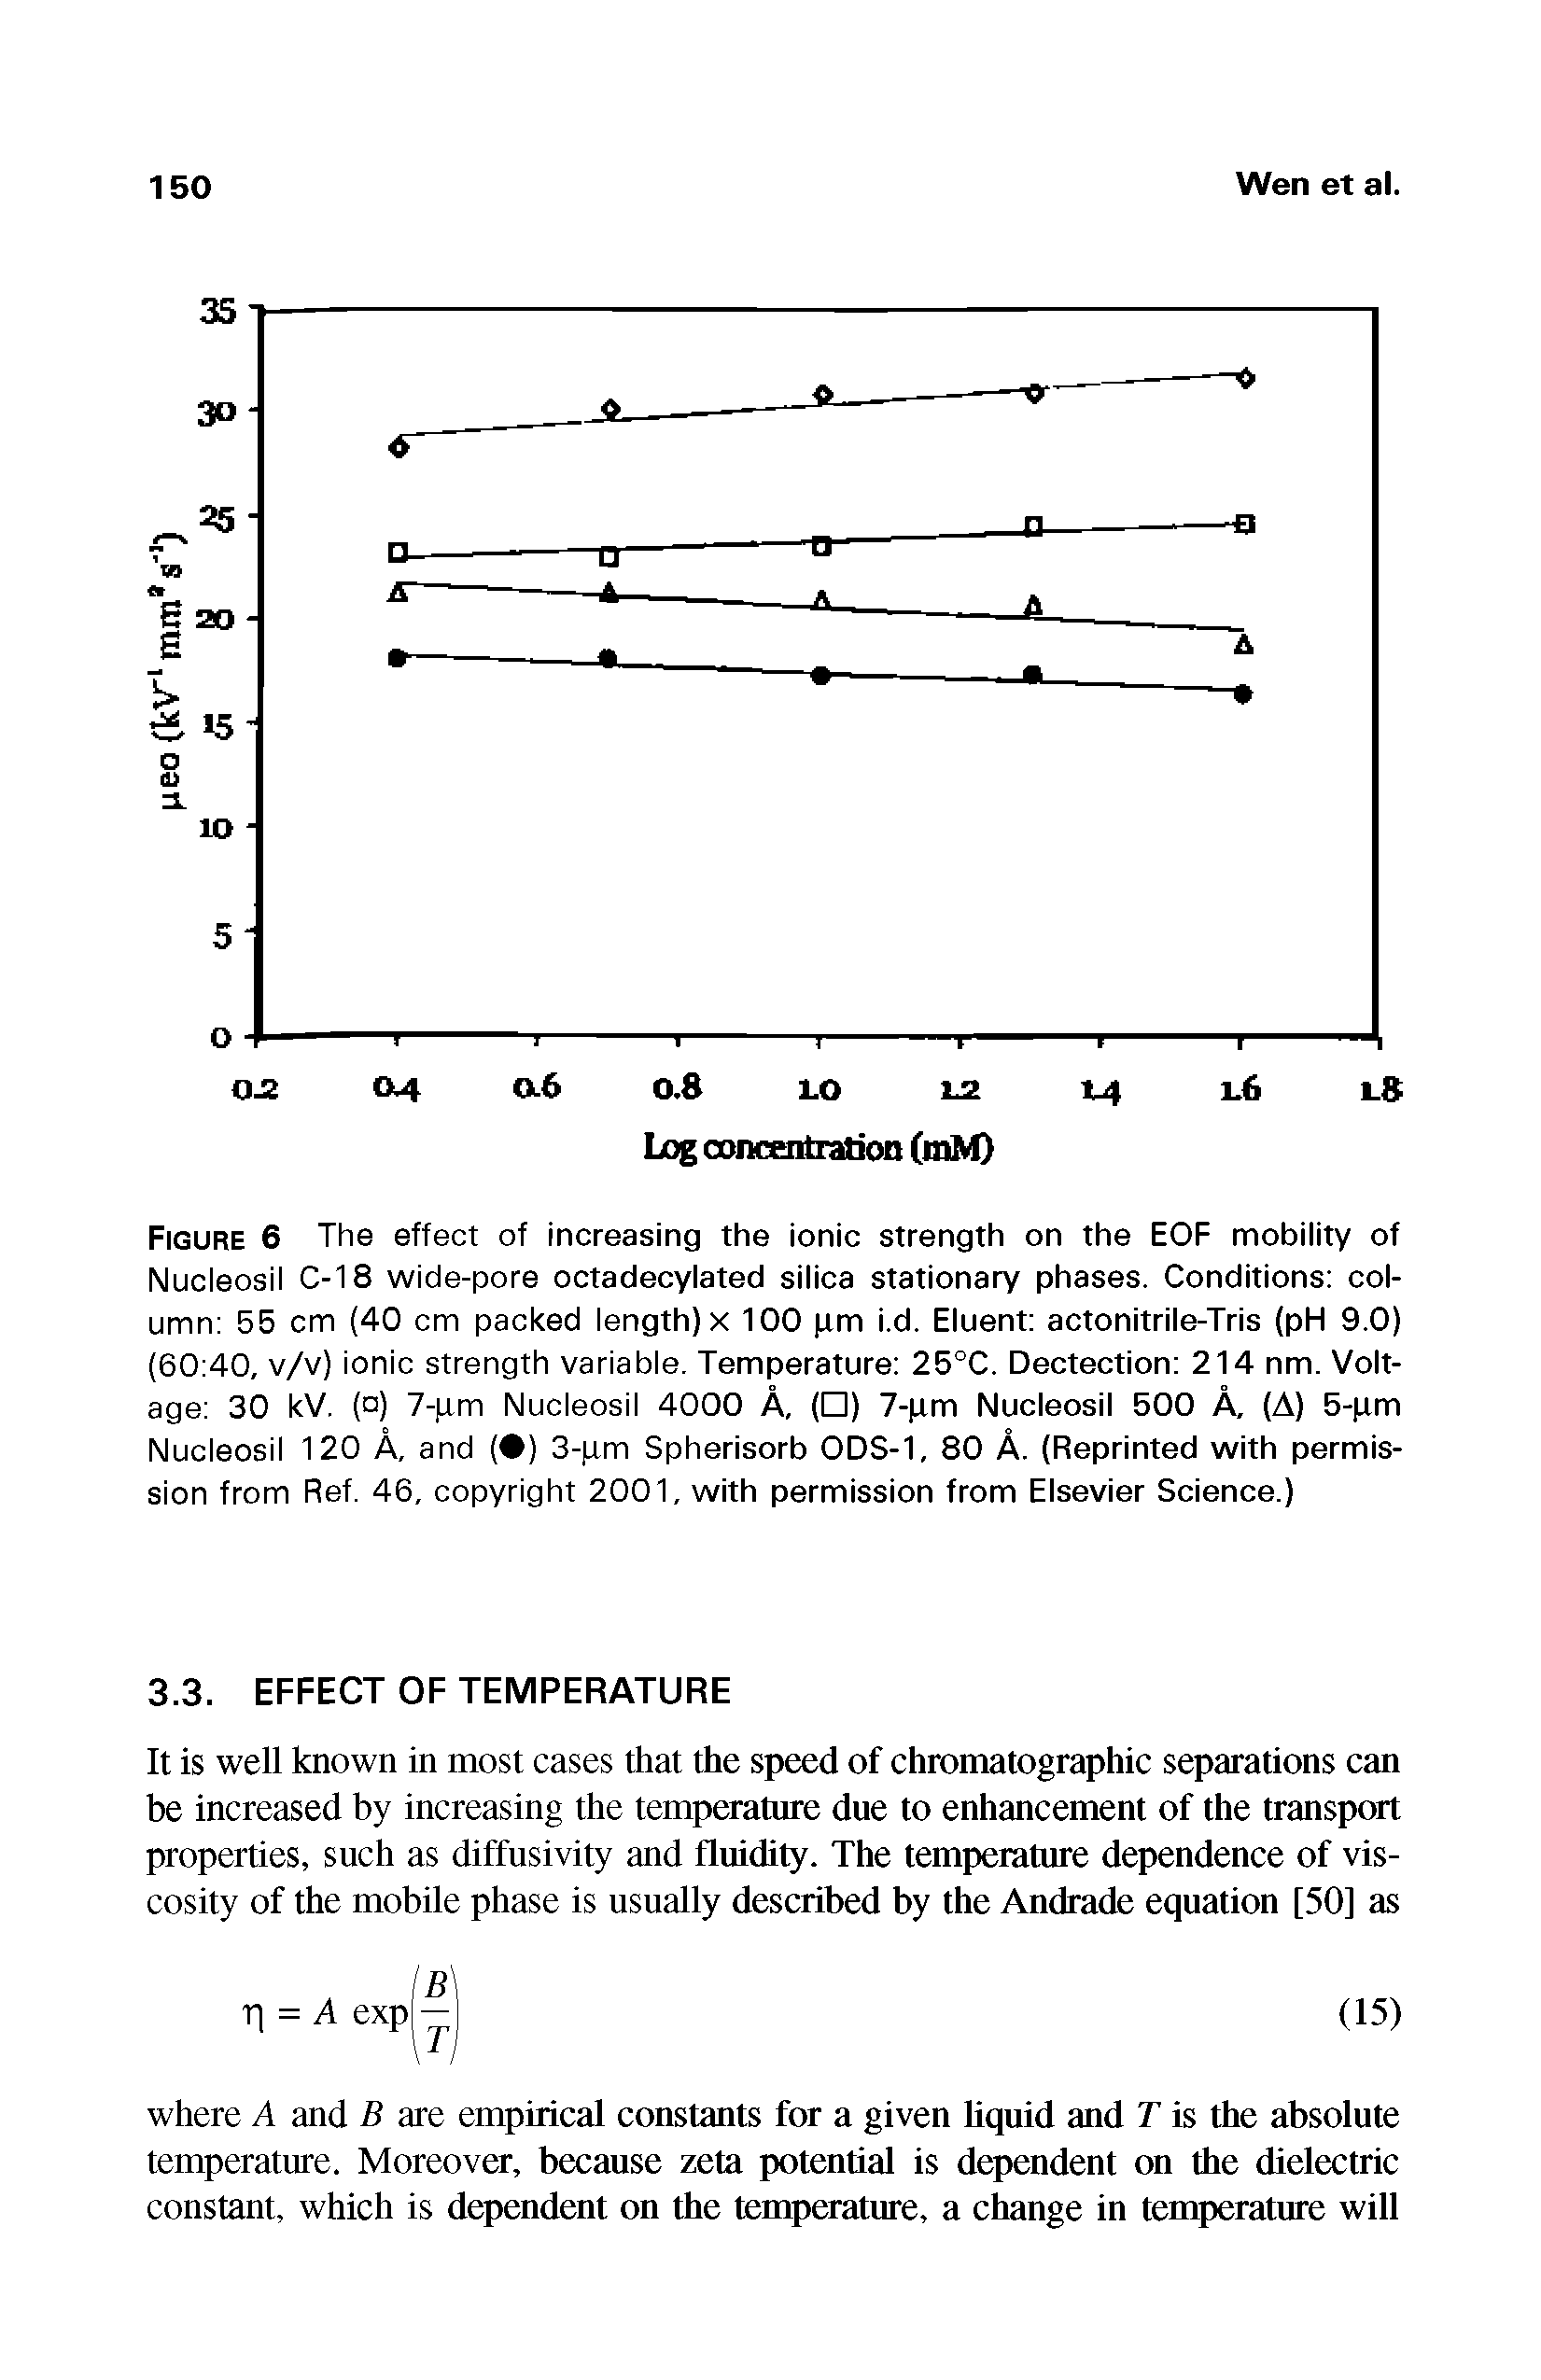 Figure 6 The effect of increasing the ionic strength on the EOF mobility of Nucleosil C-18 wide-pore octadecylated silica stationary phases. Conditions column 55 cm (40 cm packed length) x 100 pm i.d. Eluent actonitrile-Tris (pH 9.0) (60 40, v/v) ionic strength variable. Temperature 25°C. Dectection 214 nm. Voltage 30 kV. (o) 7-pm Nucleosil 4000 A, ( ) 7-pm Nucleosil 500 A, (A) 5-pm Nucleosil 120 A, and ( ) 3-pm Spherisorb ODS-1, 80 A. (Reprinted with permission from Ref. 46, copyright 2001, with permission from Elsevier Science.)...